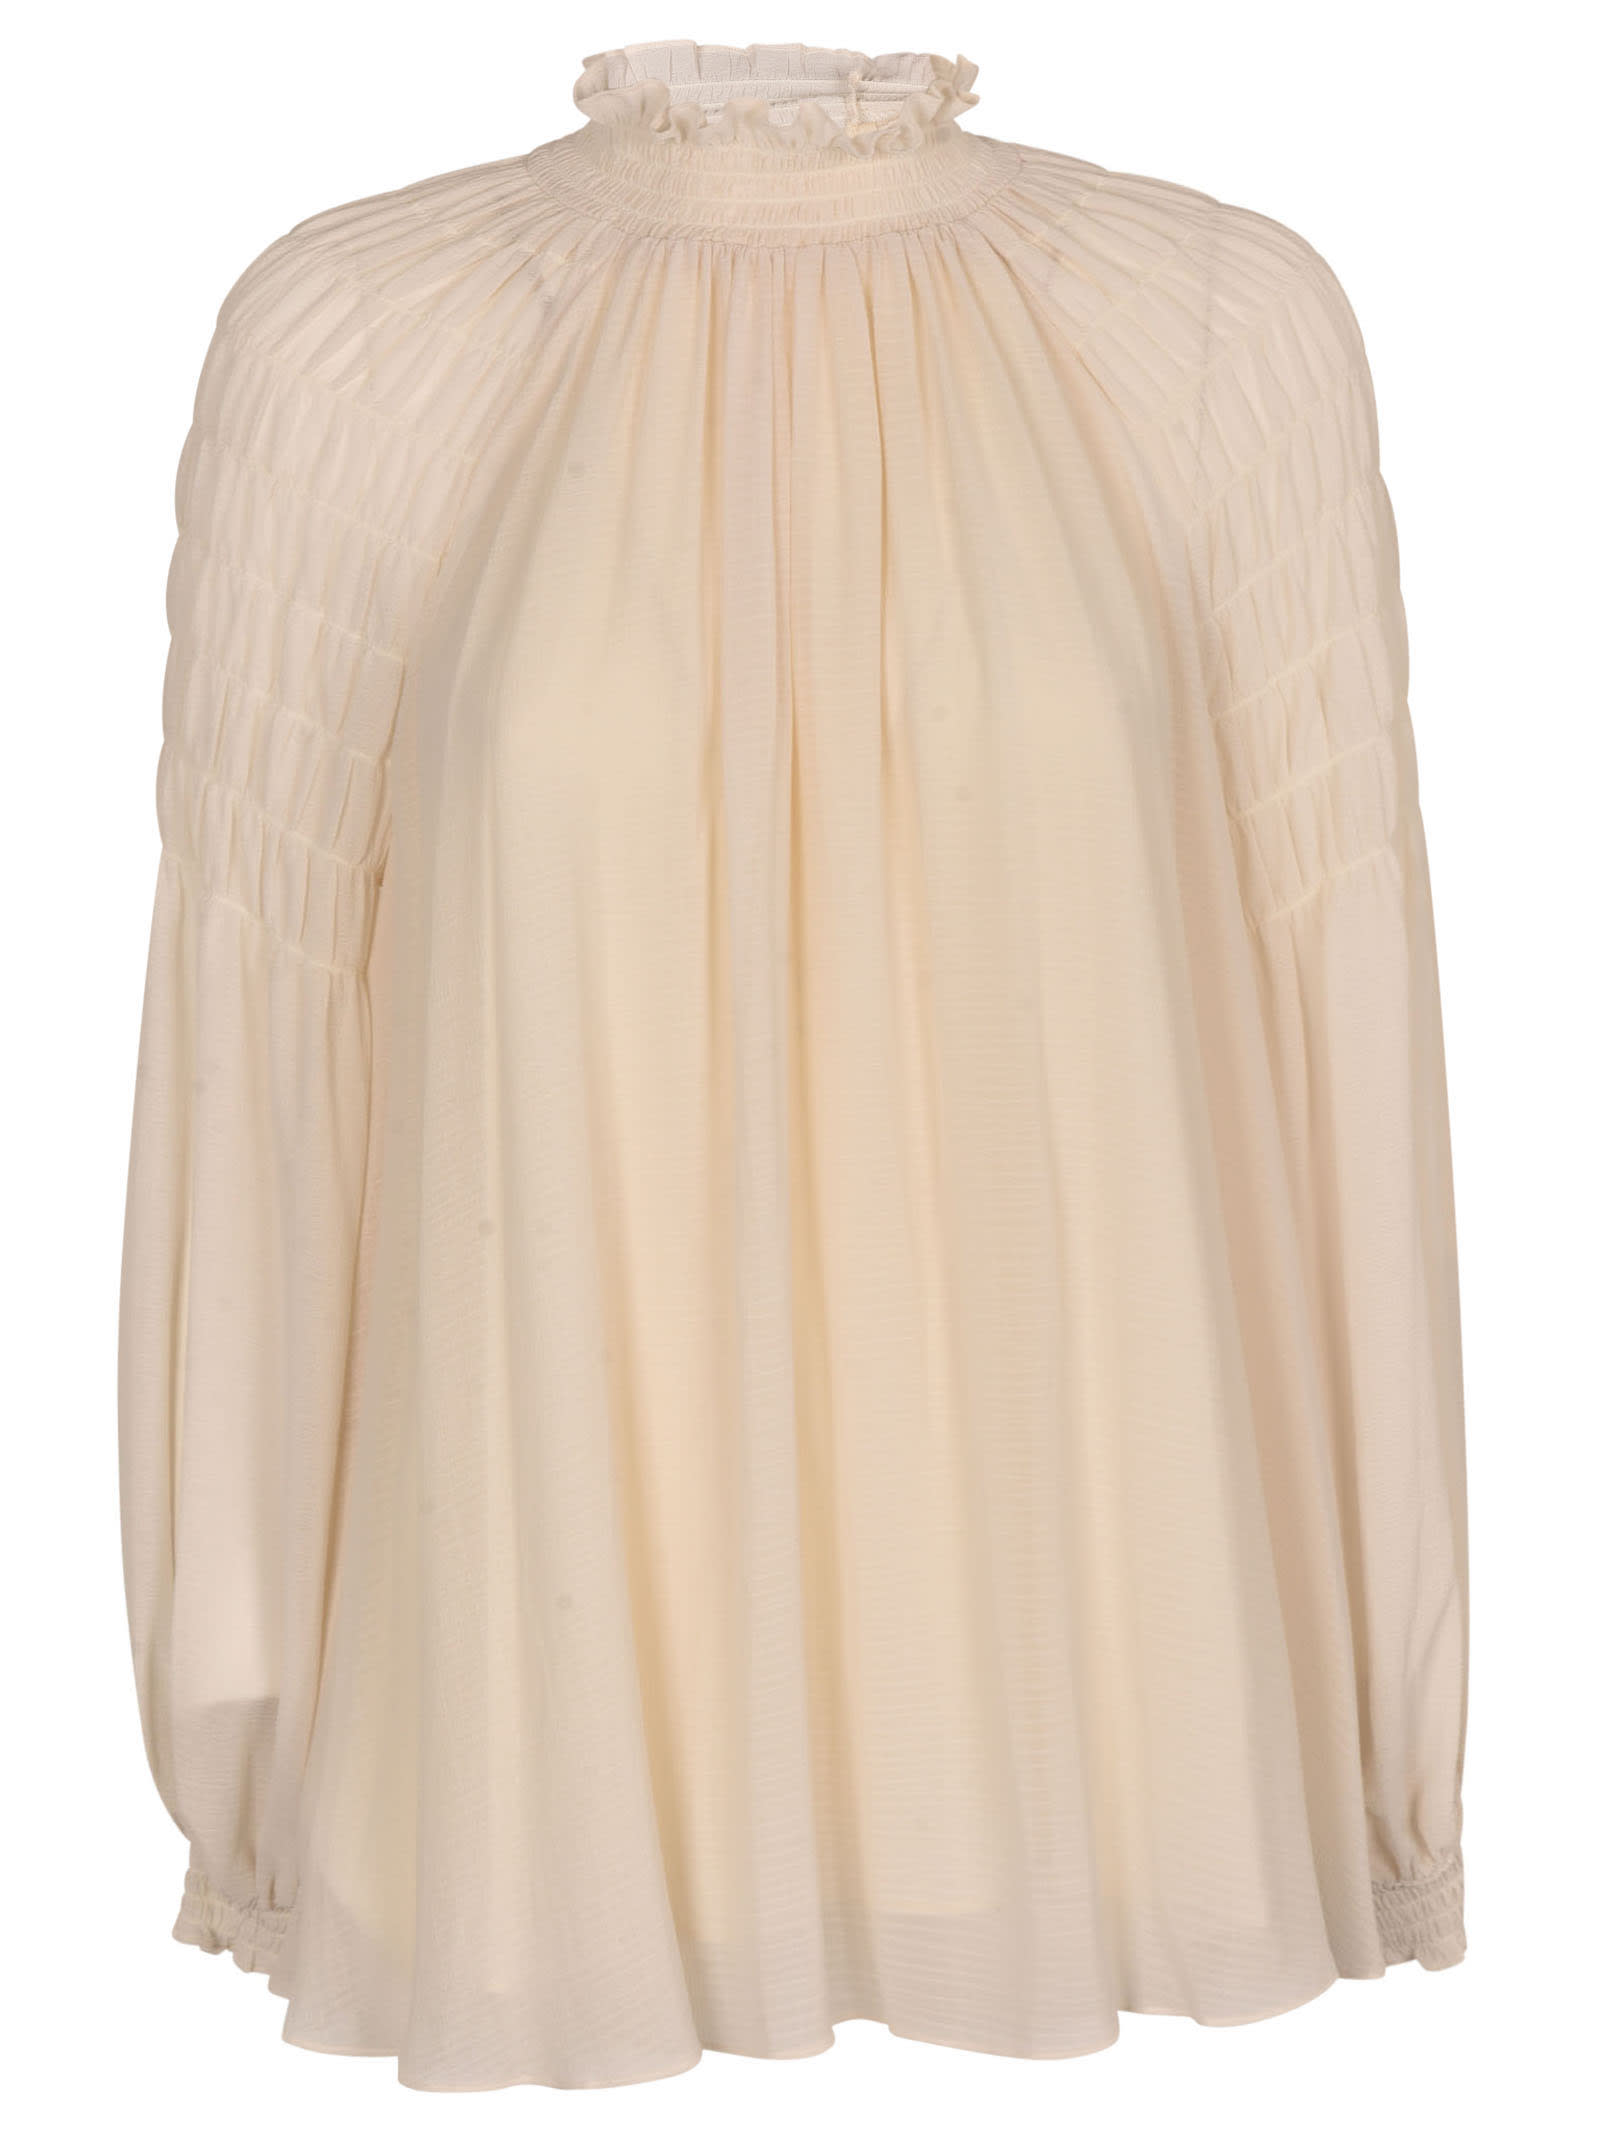 See by Chloé Ruffled Cuff Blouse